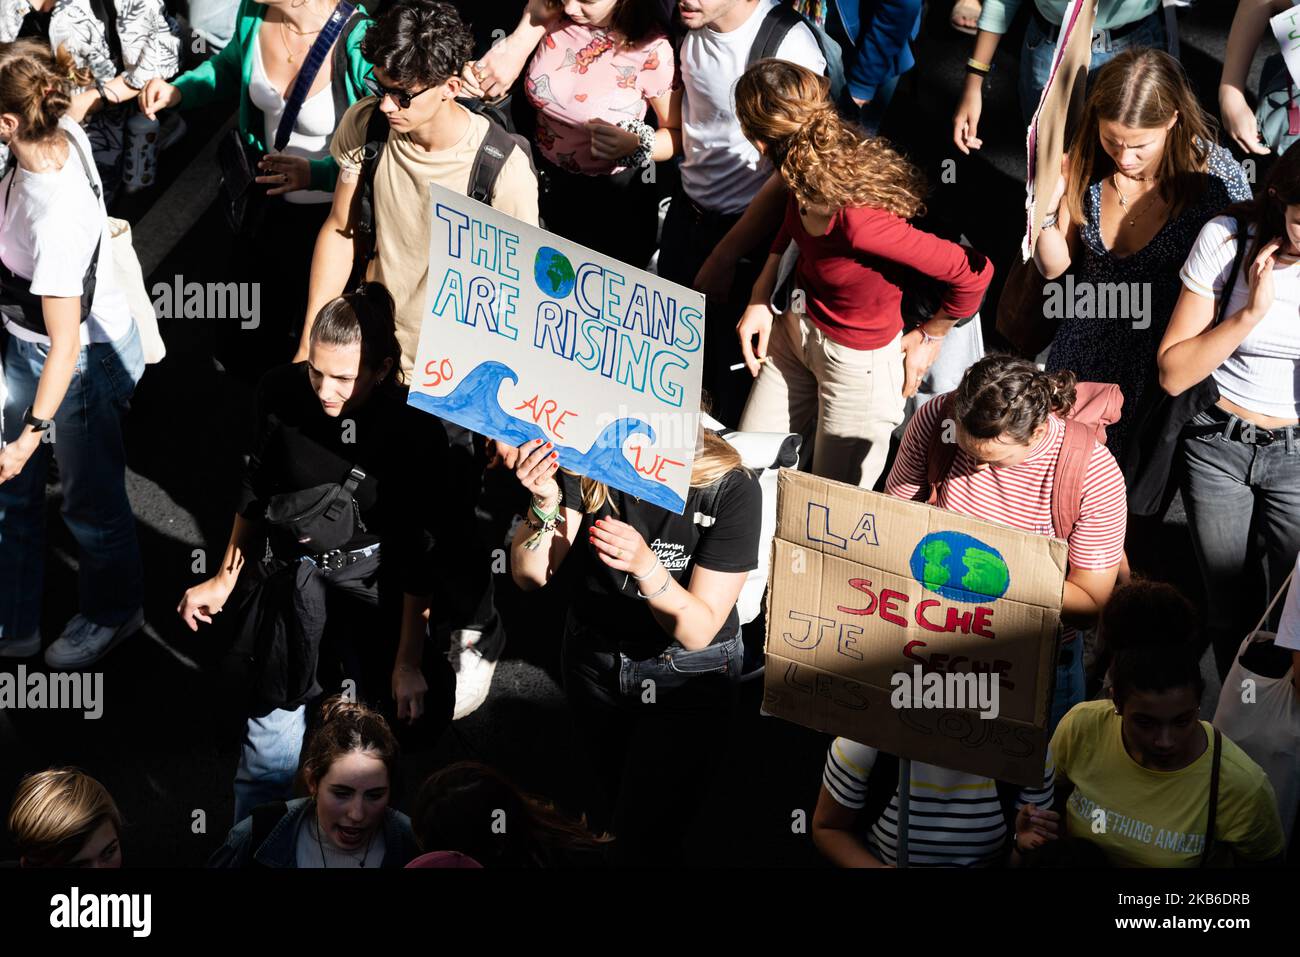 A top view of the procession of young demonstrators holding signs for the climate emergency on which slogans such as "La planète sèche, je sèche les cours" or "The oceans are rising, so we are" can be read this Friday, September 20, 2019 in Paris as part of the global strike day for the climate and the movement initiated by Greta Thunberg "Friday for Future" and organized by the Youth for Climate movement. In Paris, about 9400 young people gathered at Place de la Nation to go to the Bercy garden with numerous signs and slogans reminding the governments of the climate emergency and denouncing t Stock Photo